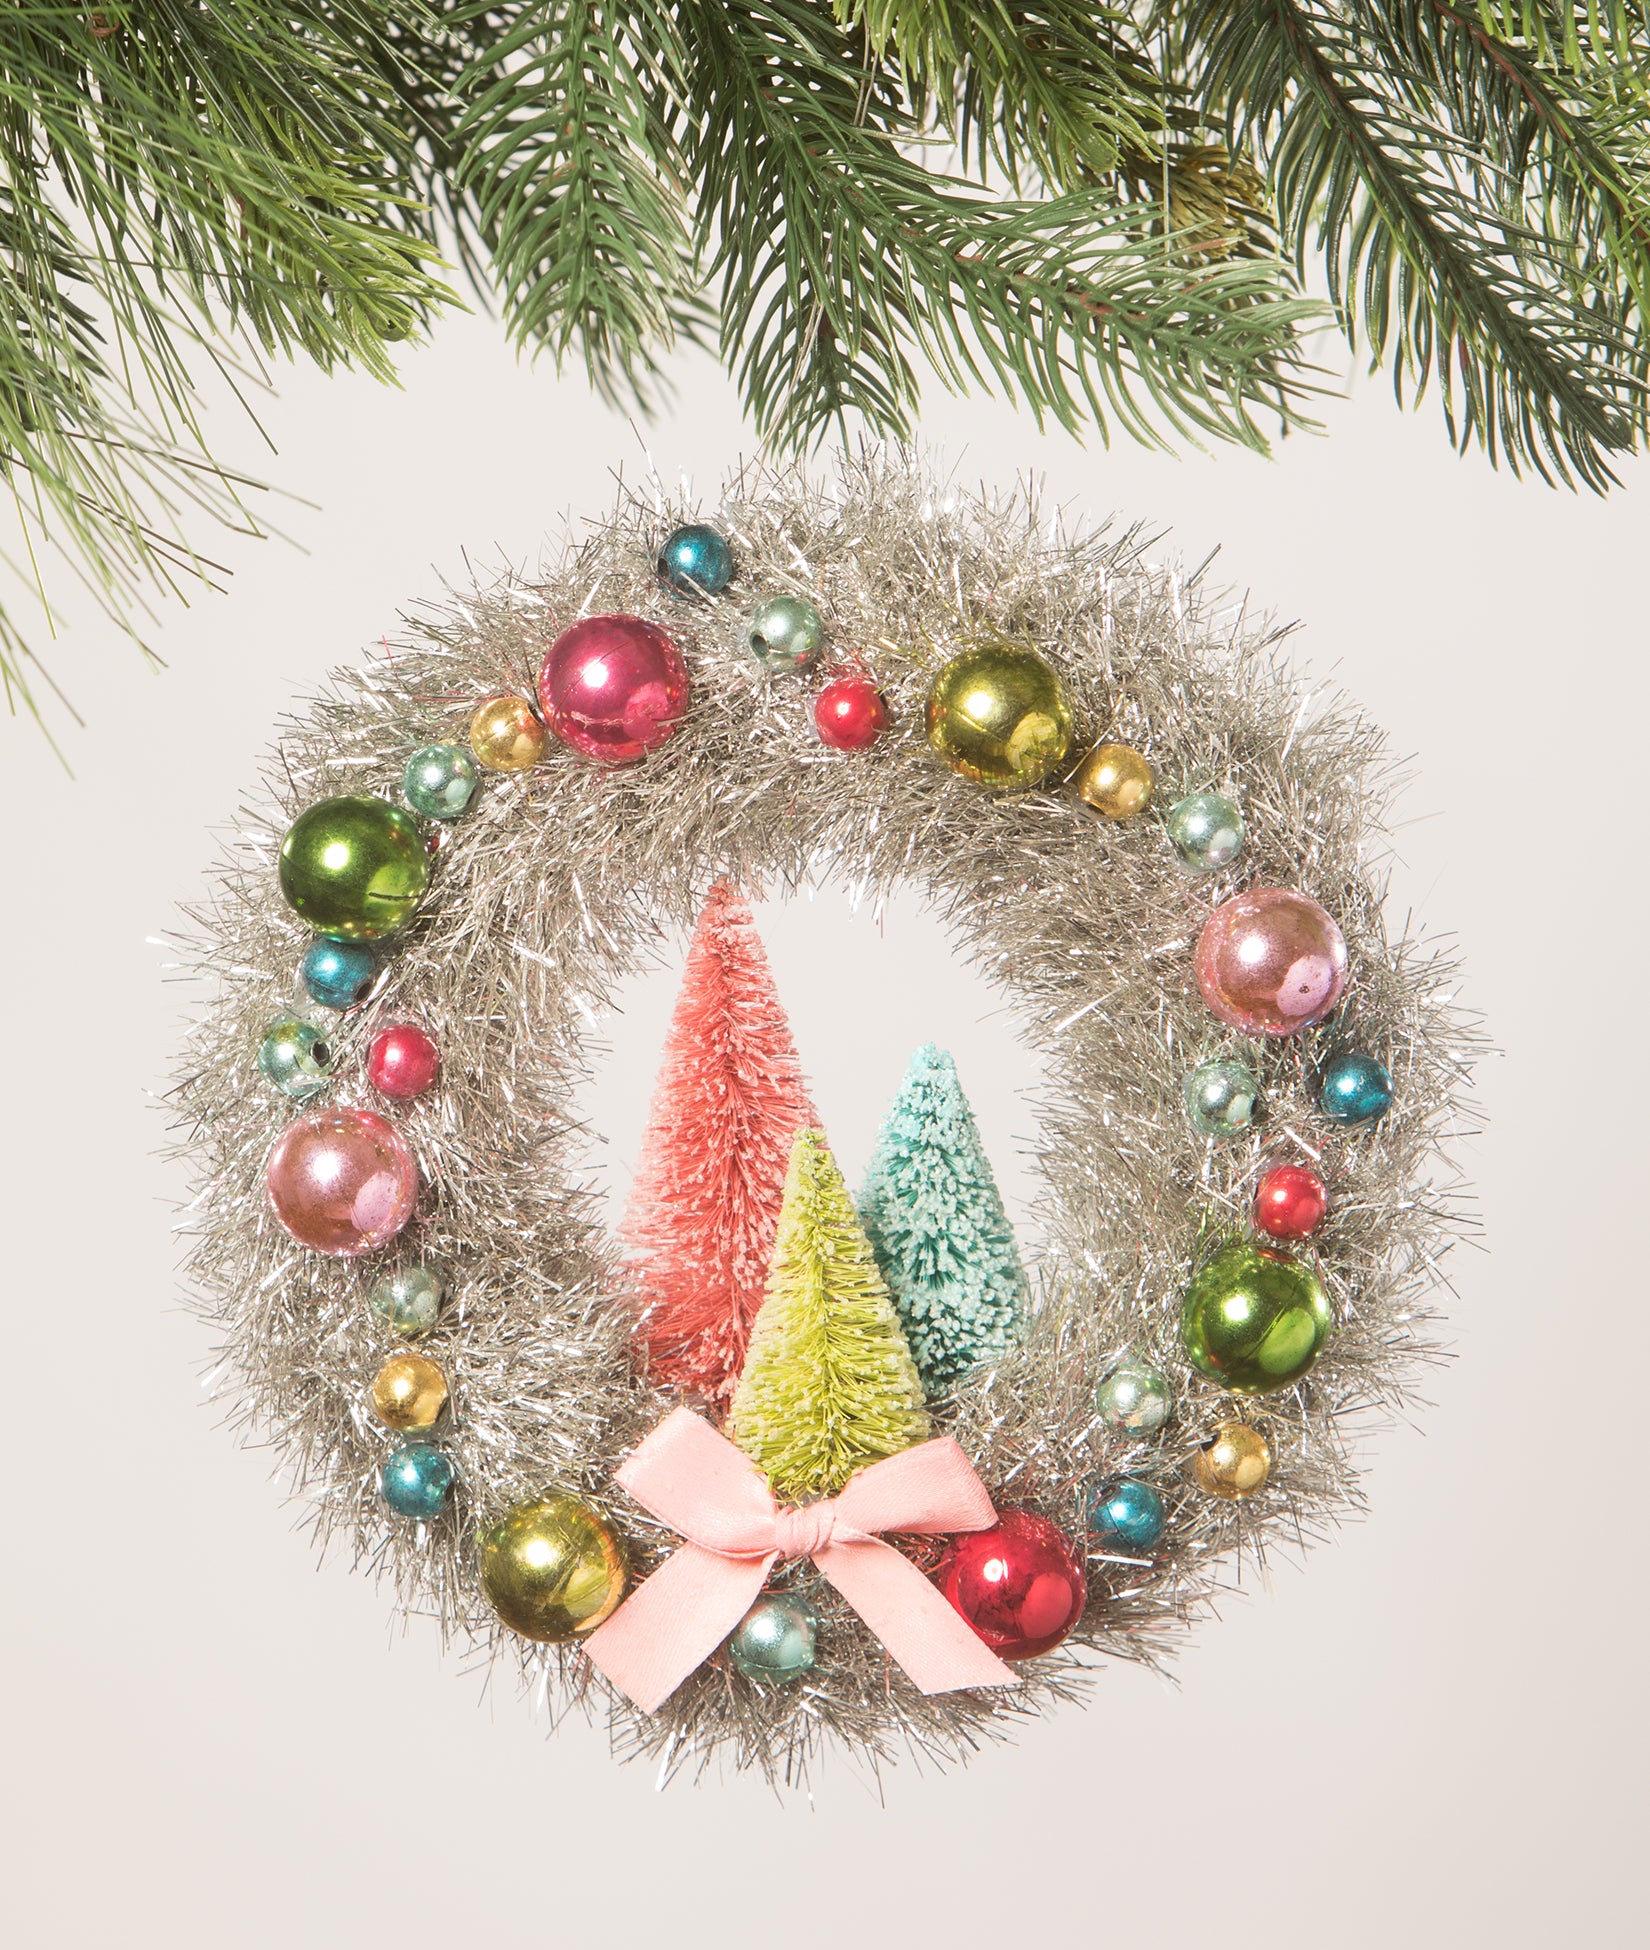 Little Tinsel Wreath with Colorful Beads and Bottle Brush Trees in Pink, Green, and Turquoise